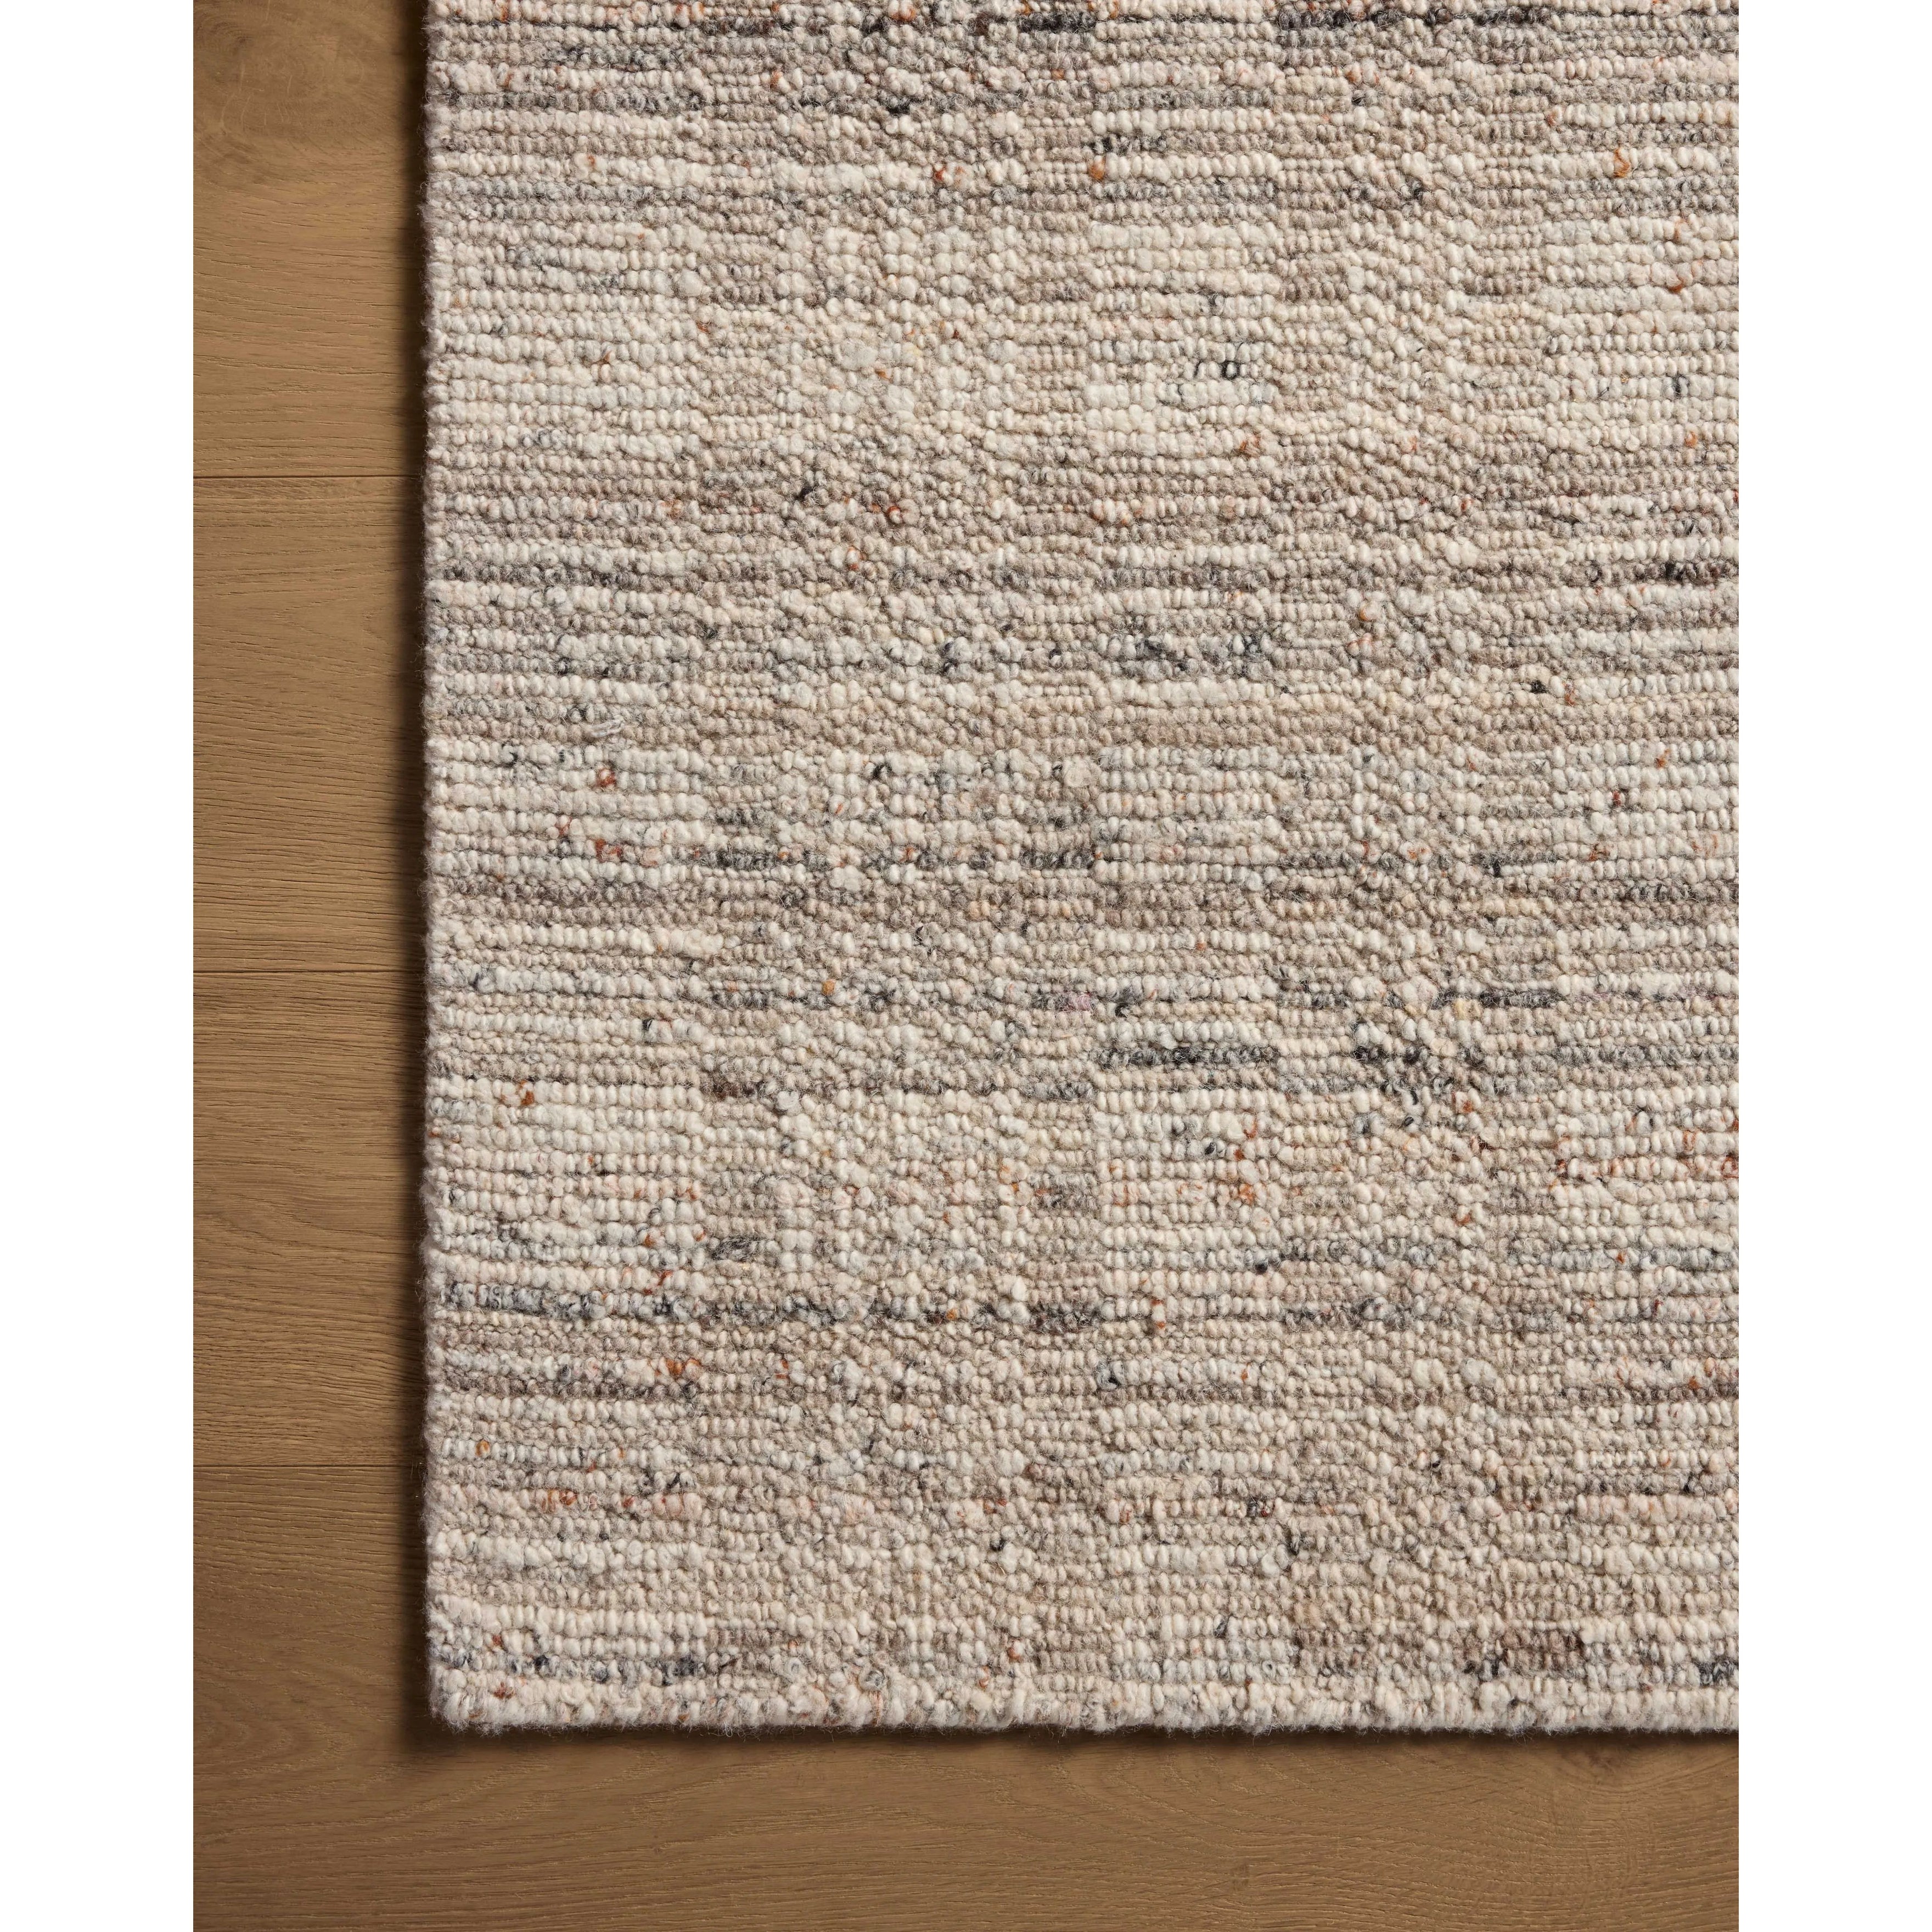 The Sonya Pebble / Fog Rug is a hand-loomed area rug with a light, airy palette and understated graphic design. The rug’s textural pile is a soft blend of wool and nylon that creates dimension in living rooms, bedrooms, and more. Amethyst Home provides interior design, new home construction design consulting, vintage area rugs, and lighting in the Newport Beach metro area.